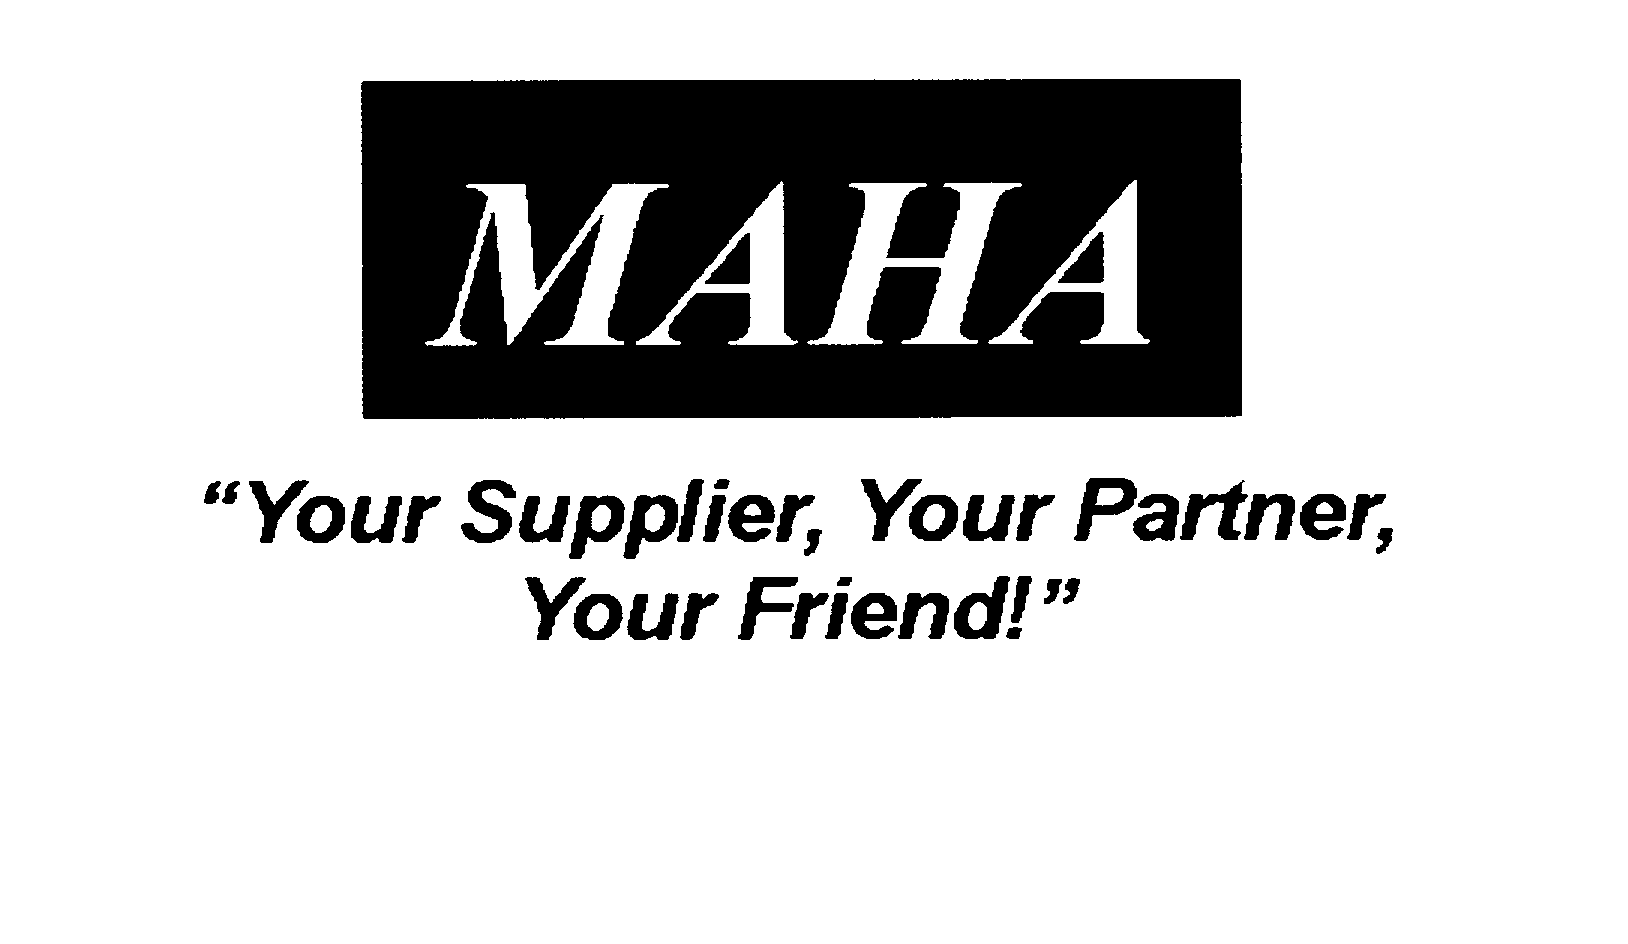  MAHA "YOUR SUPPLIER, YOUR PARTNER, YOUR FRIEND!"